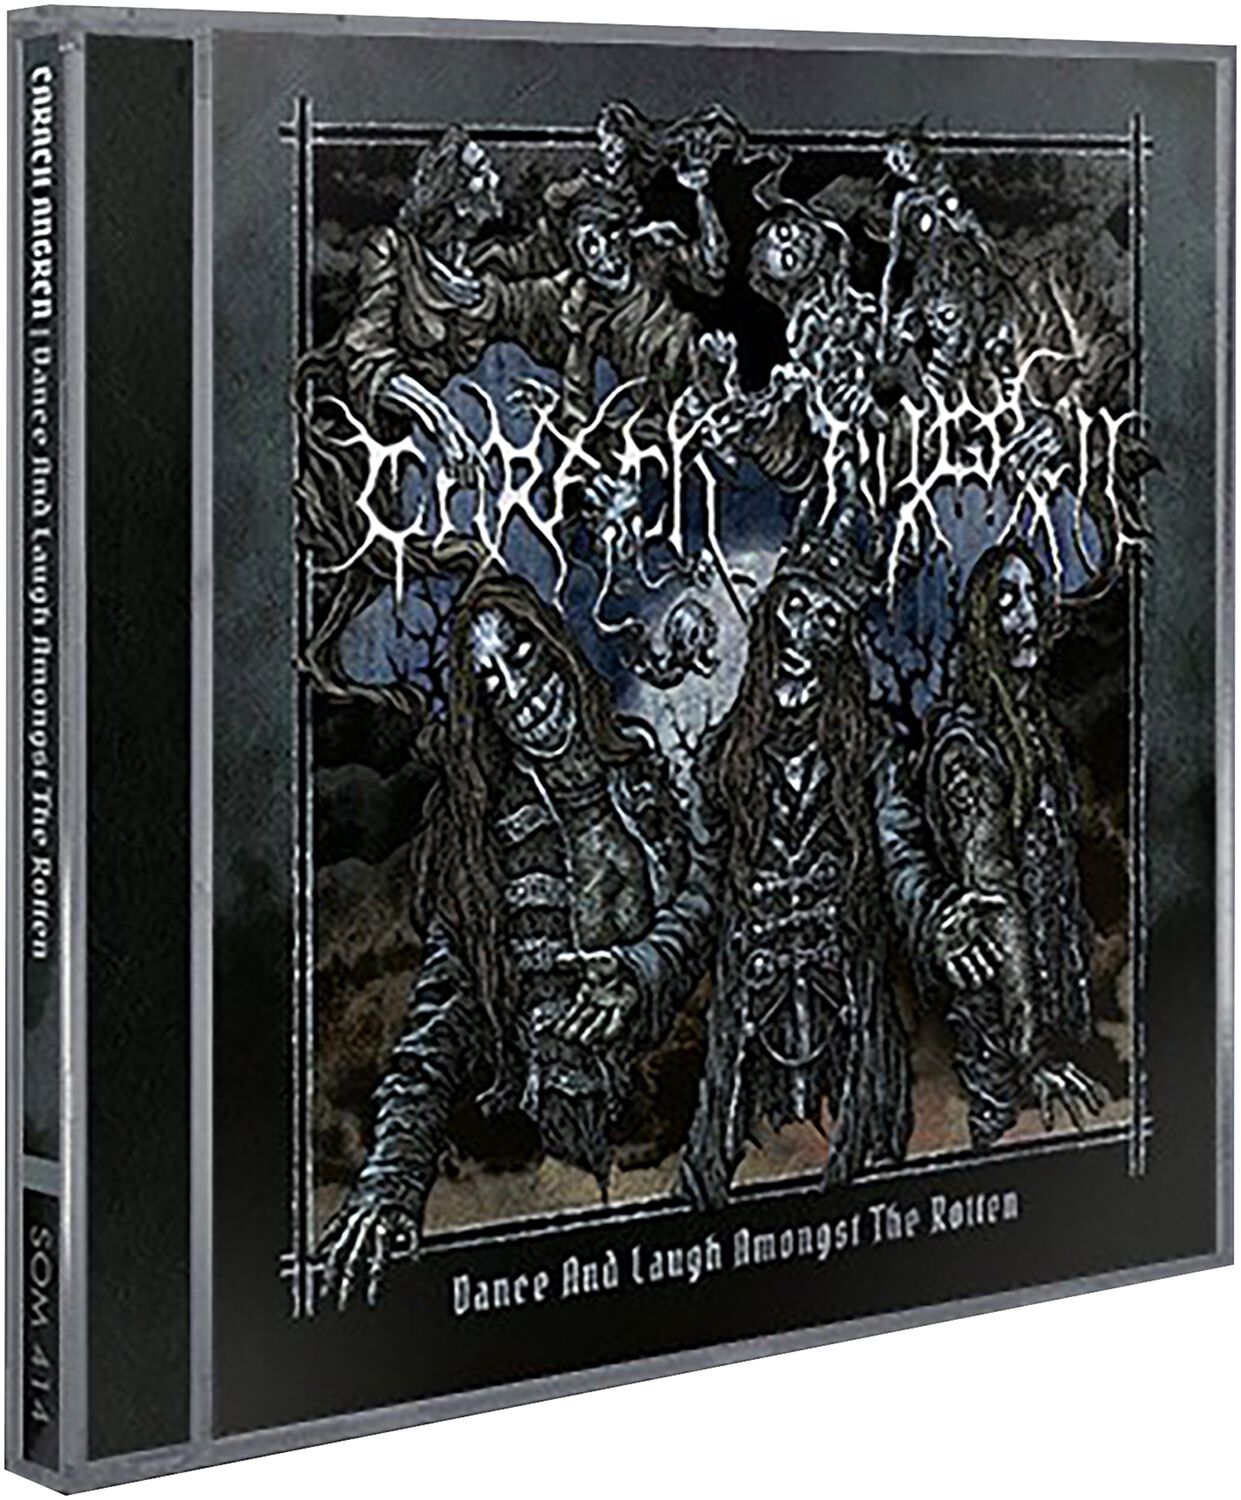 Dance and laugh amongst the rotten von Carach Angren - CD (Jewelcase)